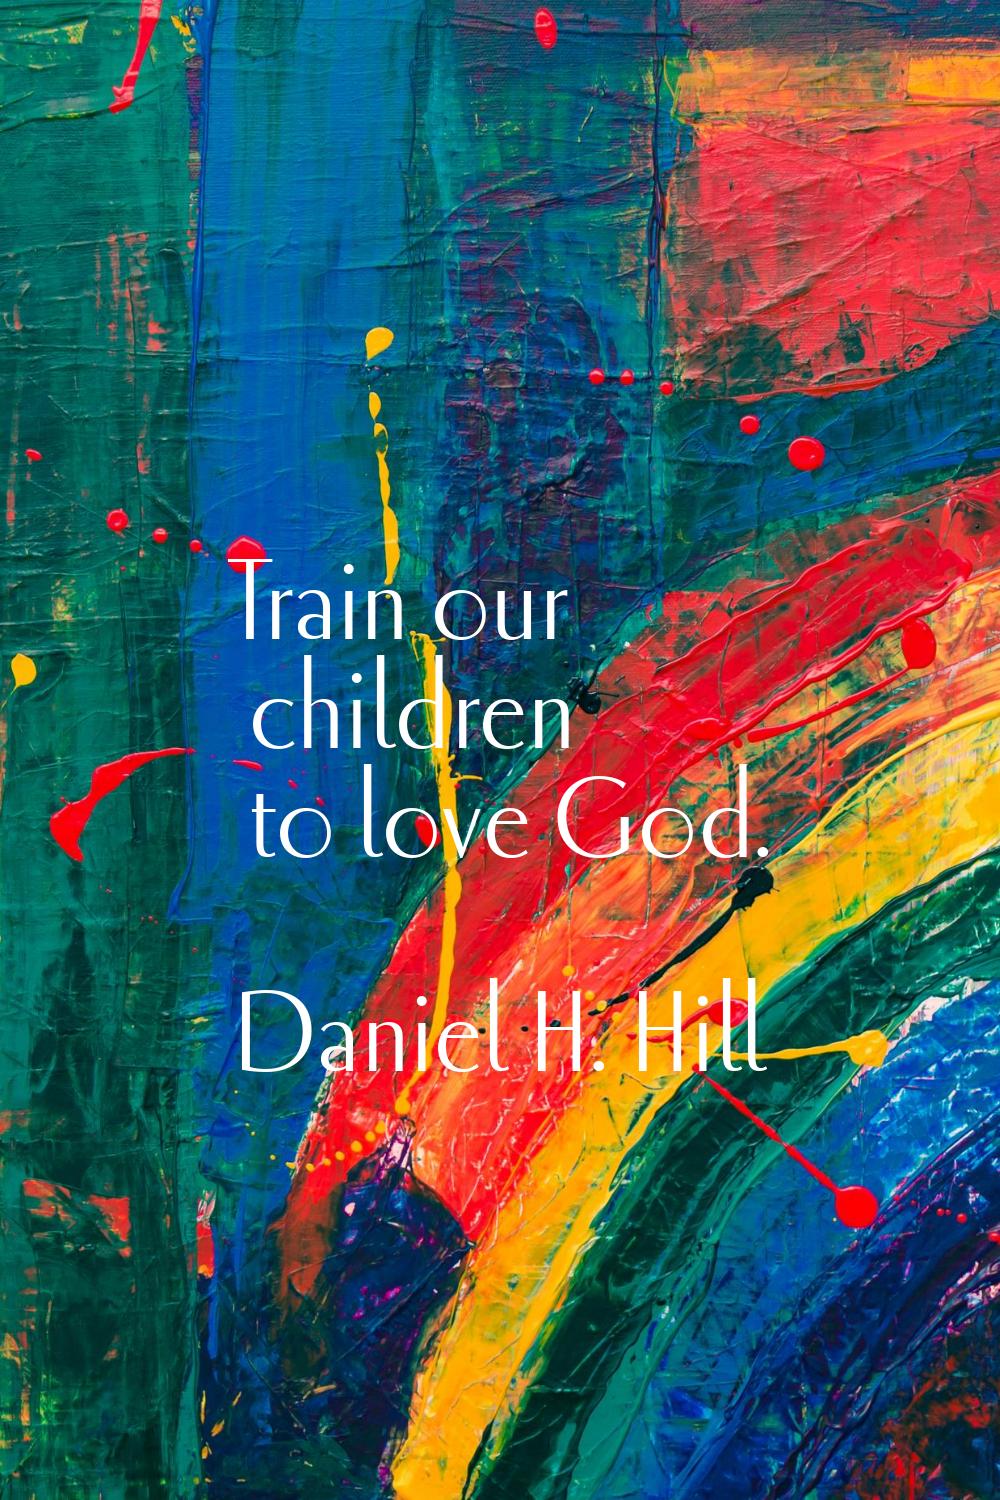 Train our children to love God.